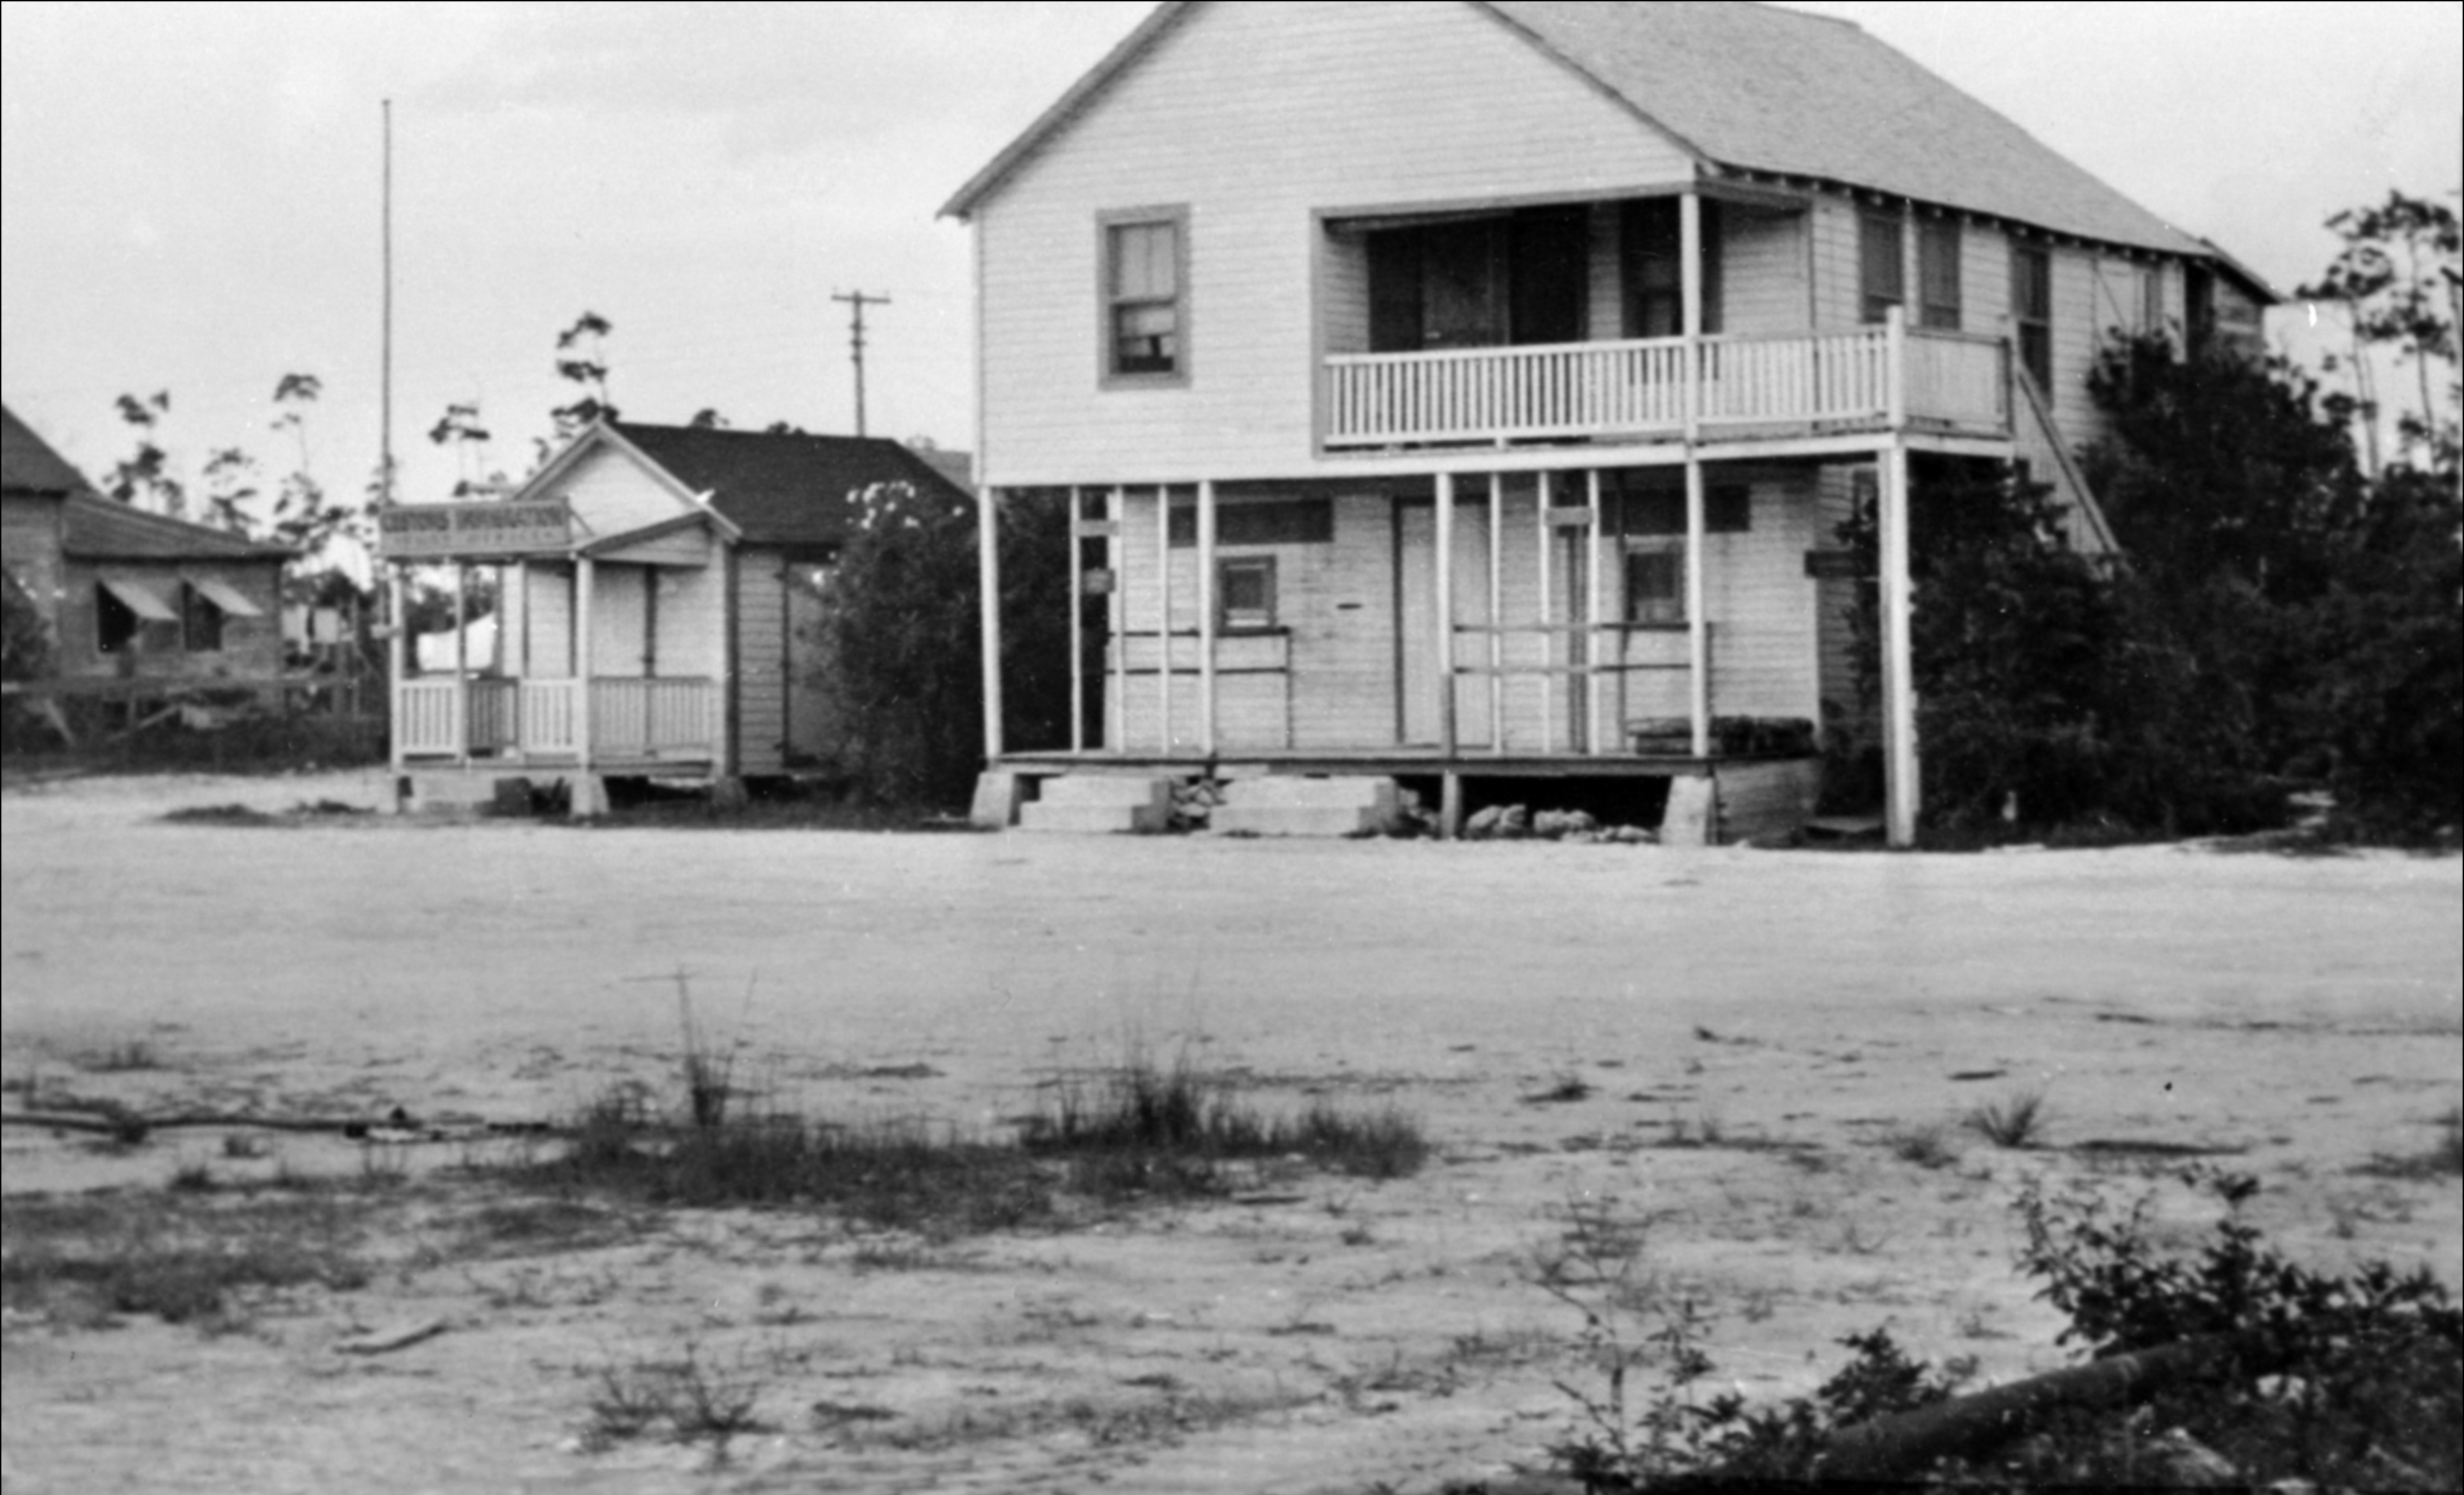 Abaco Lumber Company's office building, 1950's